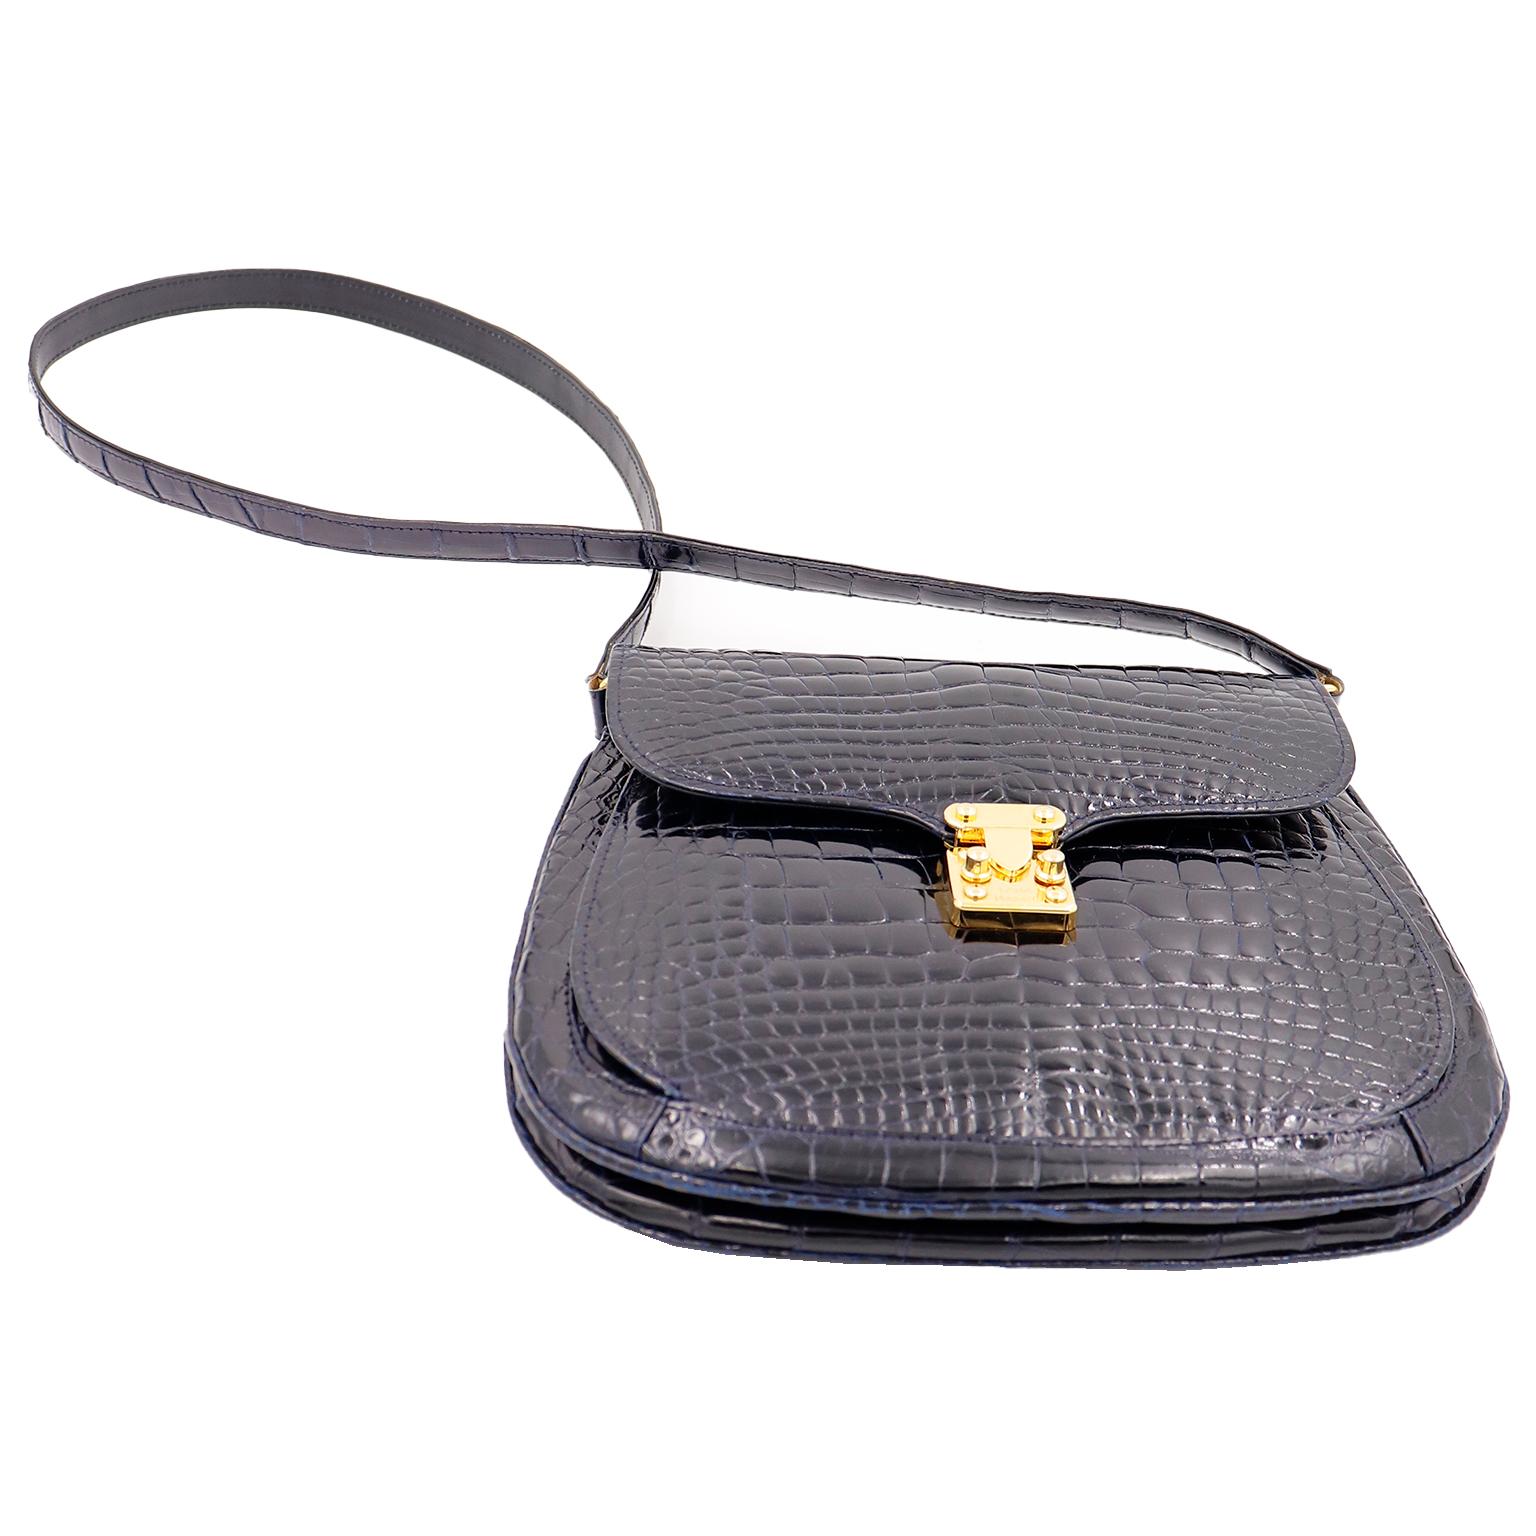 This Lana Marks black gloss alligator handbag is the epitome of quiet luxury. The bag has a shoulder strap and a front gold branded lock closure. Luxury bags like these are so elegant and we love bags that define 